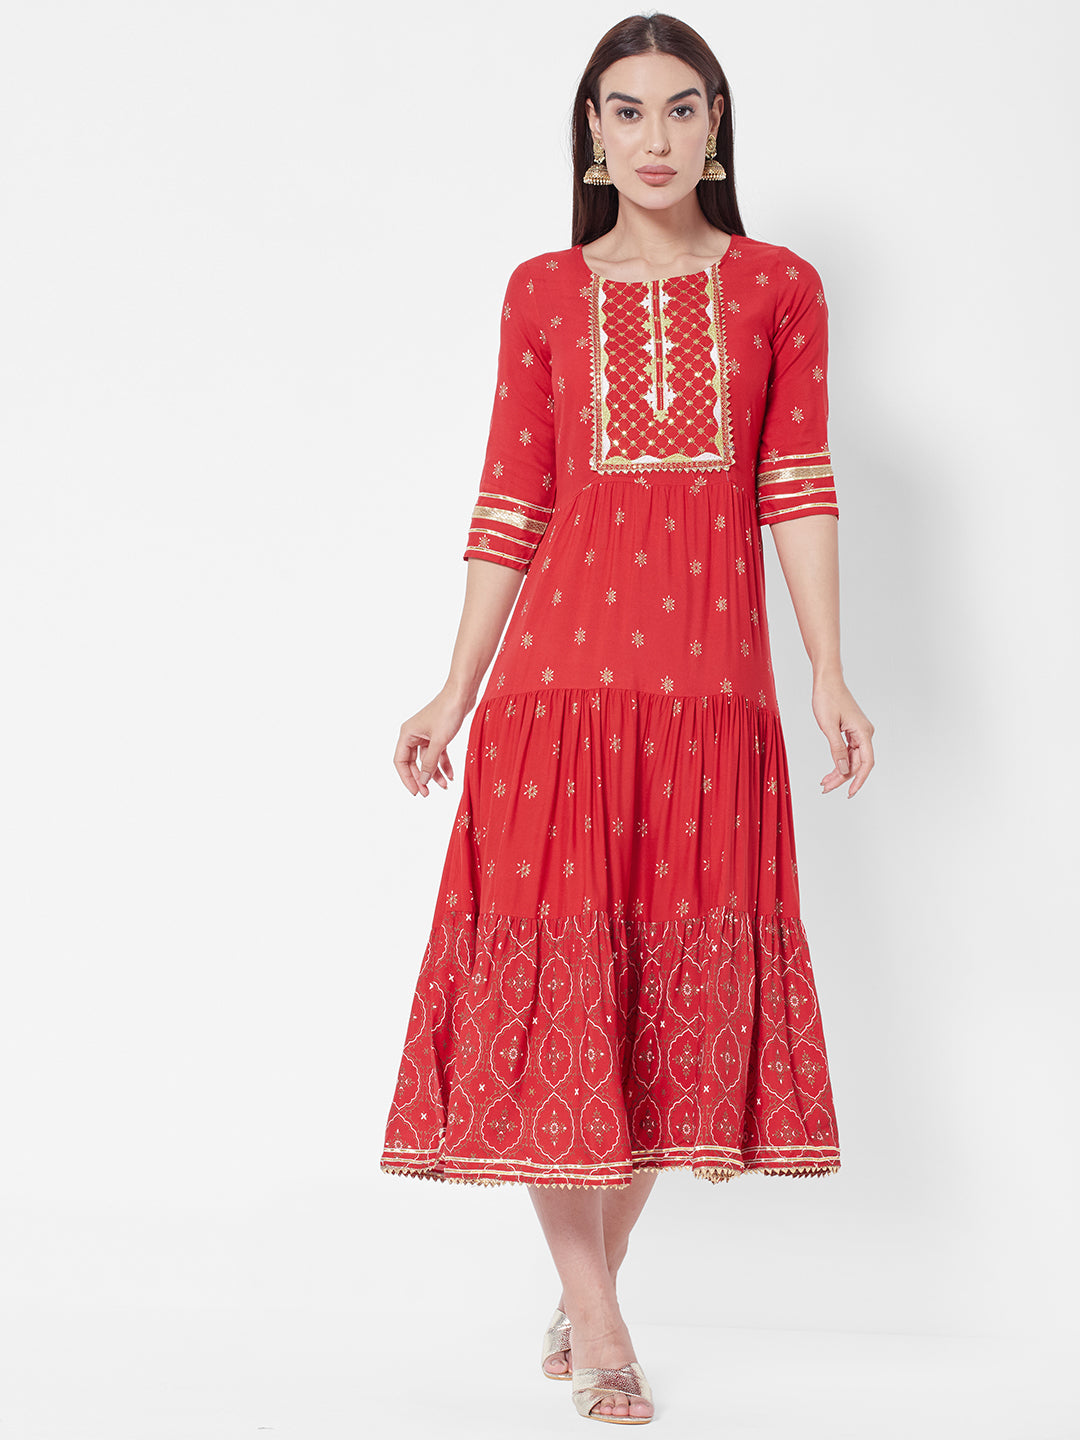 Vedic Floral Printed Sequinned Ethnic Tiered Ethnic Dress